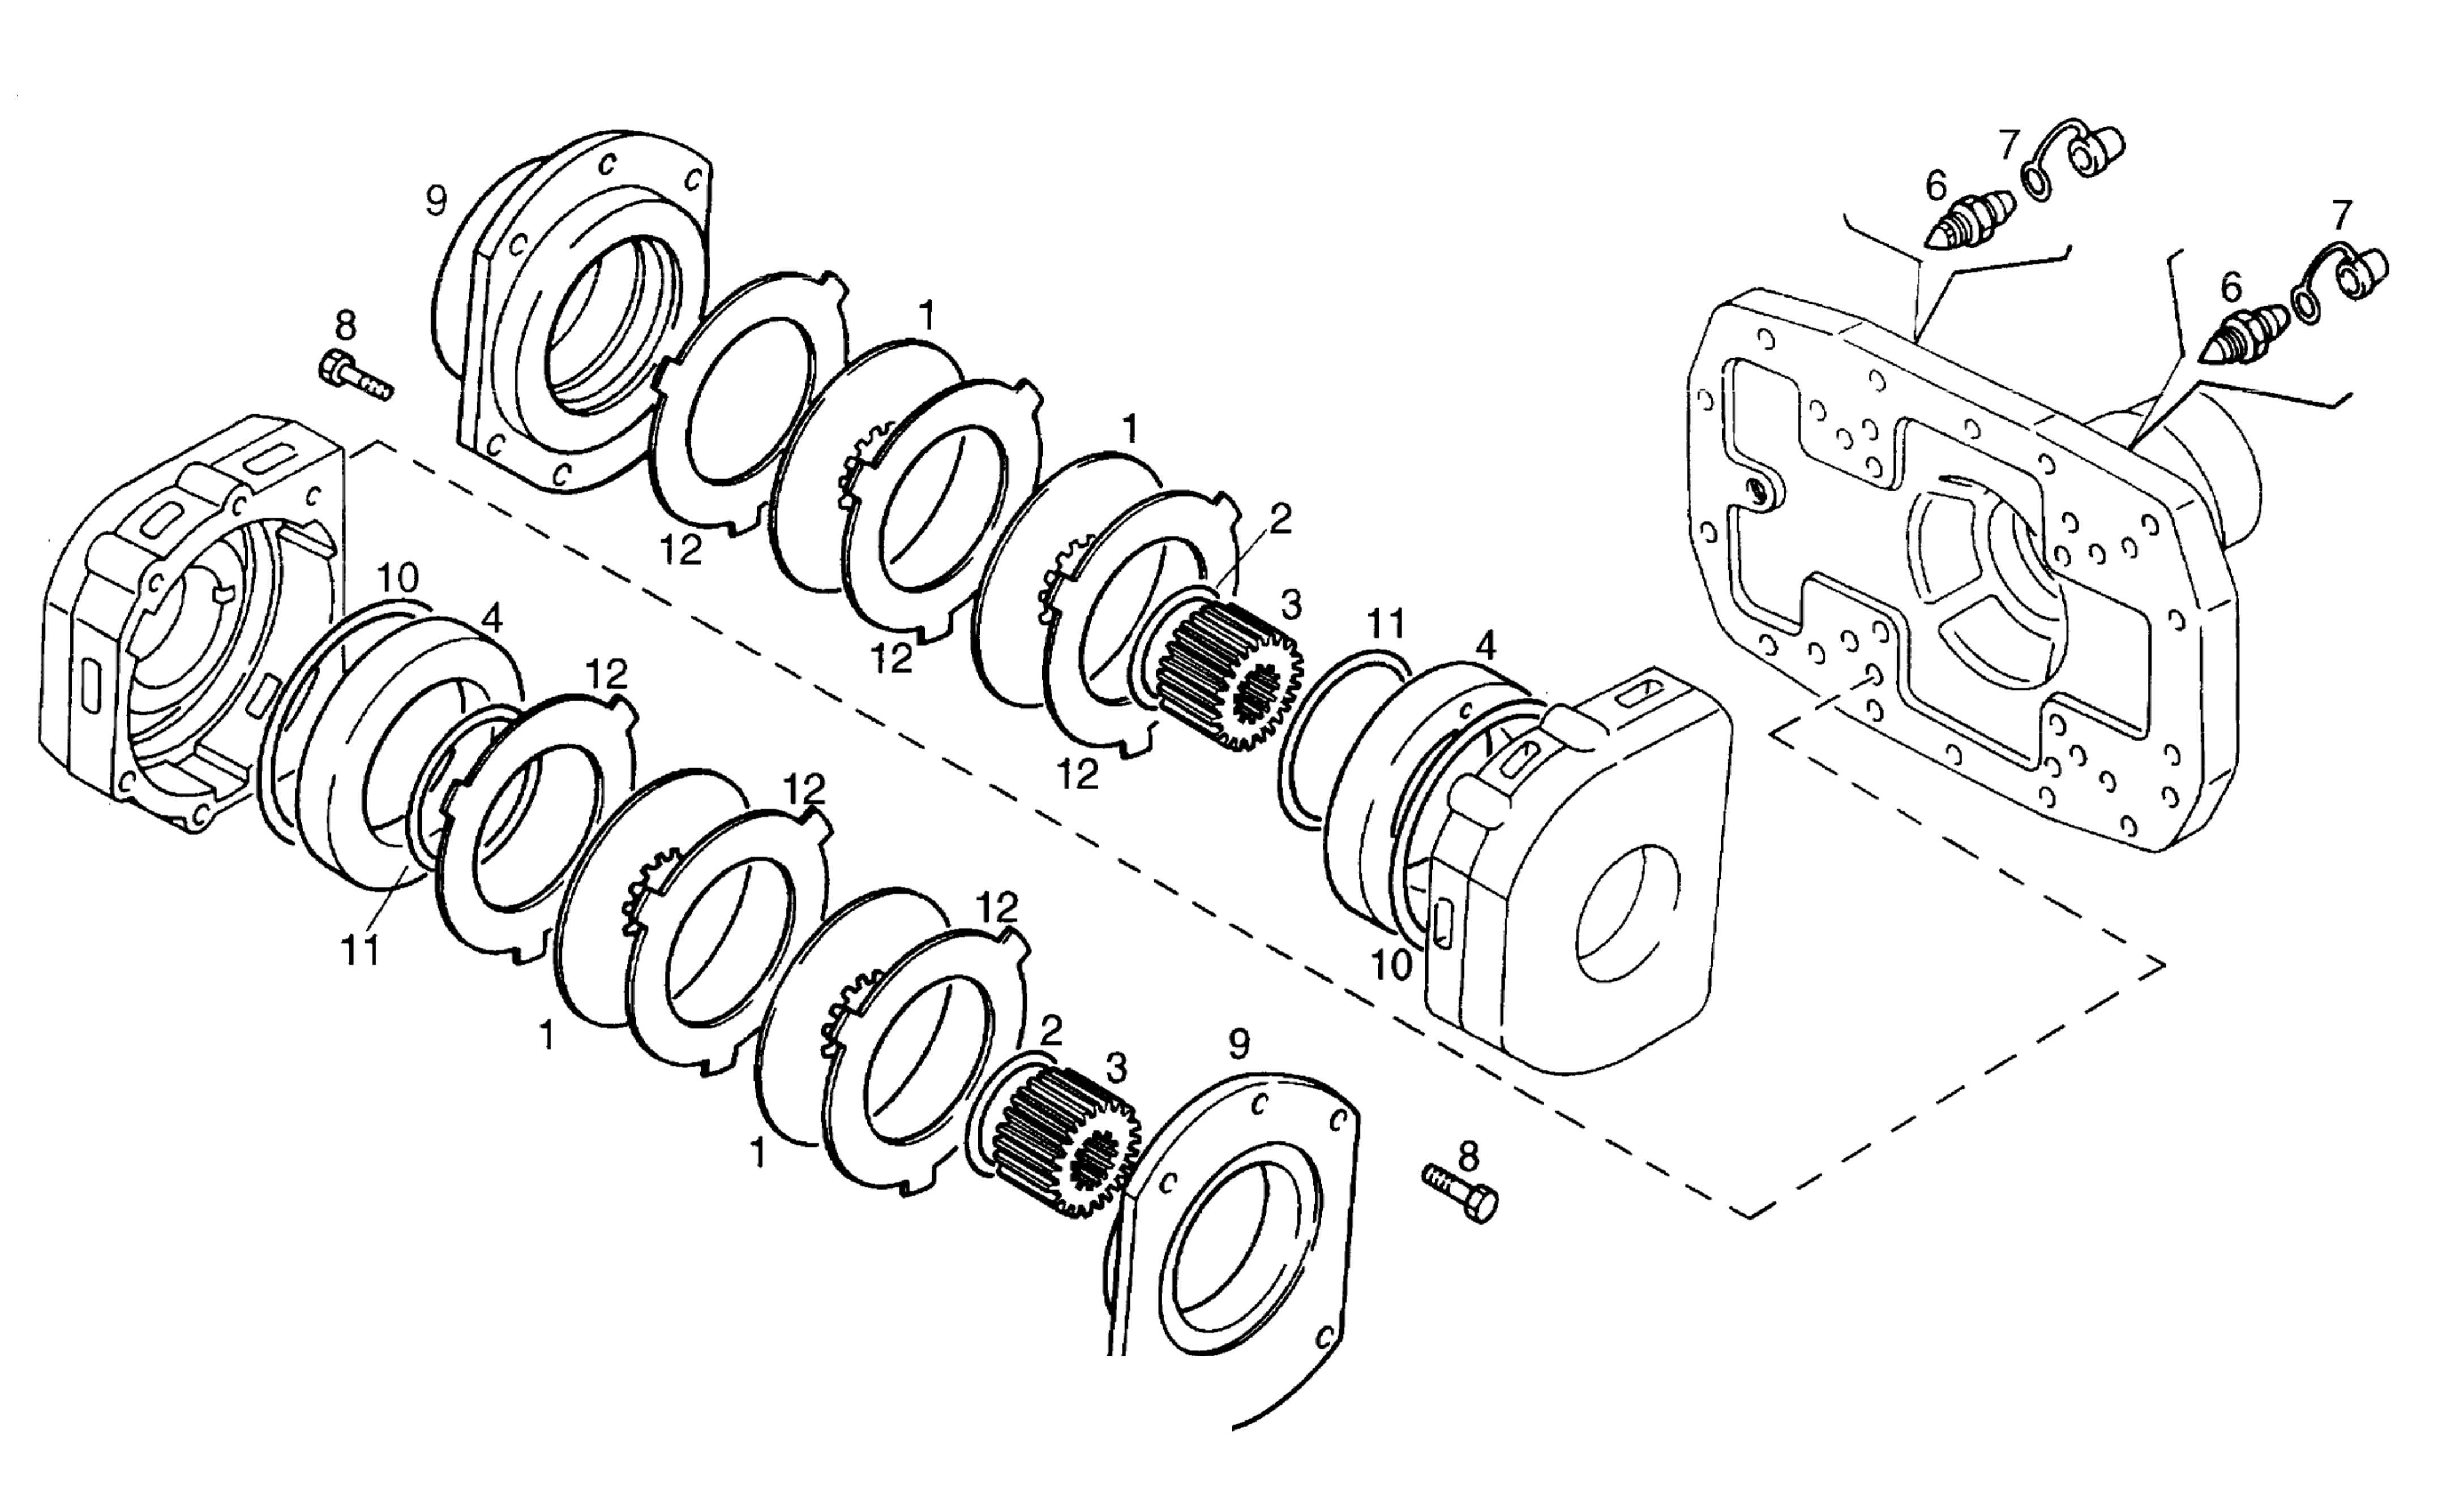 drawing for McCORMICK 1440429X1 - BOLT